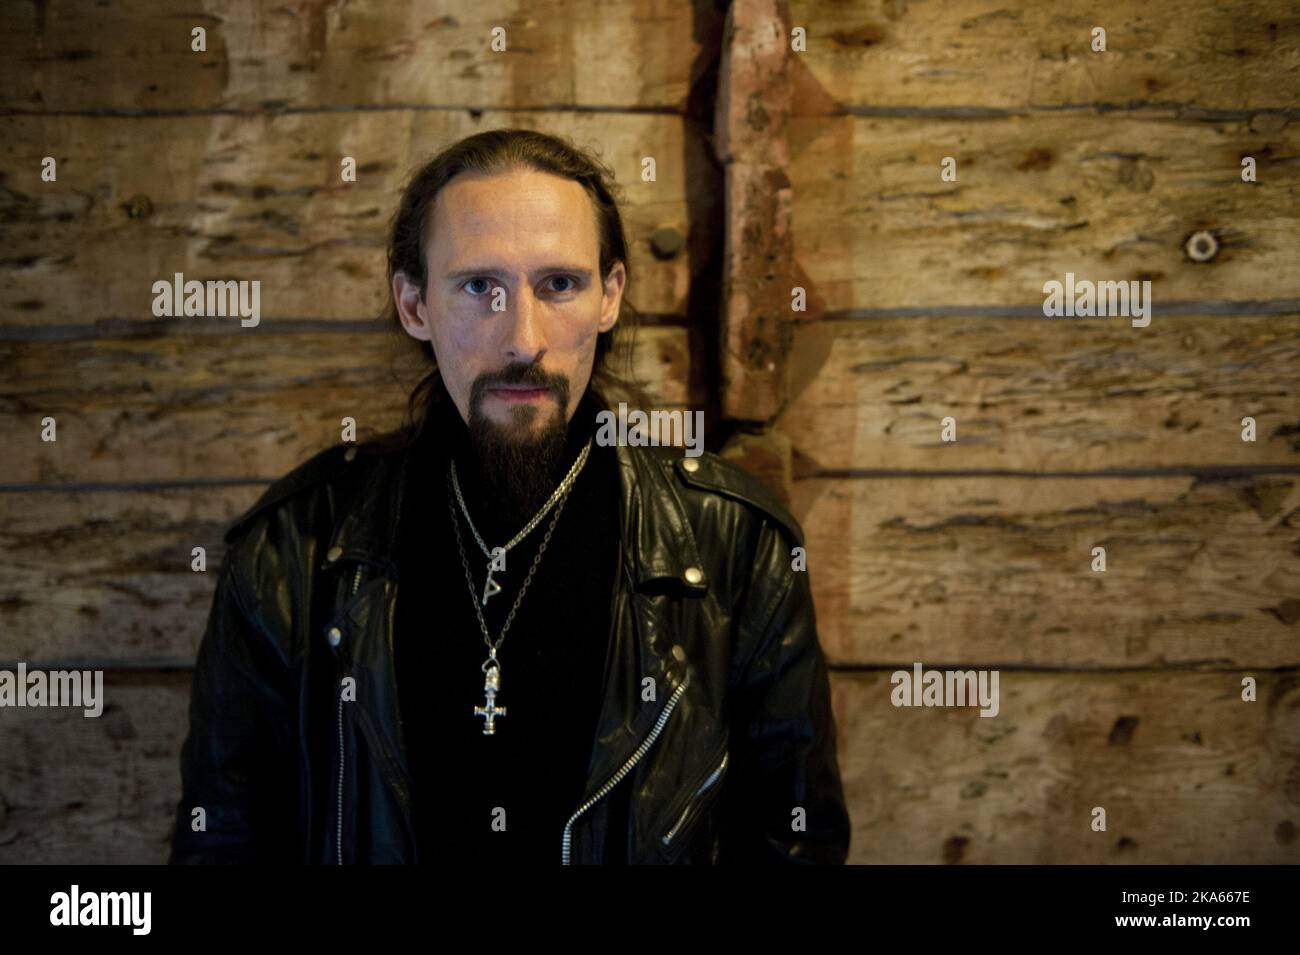 Singer Kristian Eivind Espedal known by the stage name Gaahl and former frontman of black metal band Gorgoroth.   Stock Photo